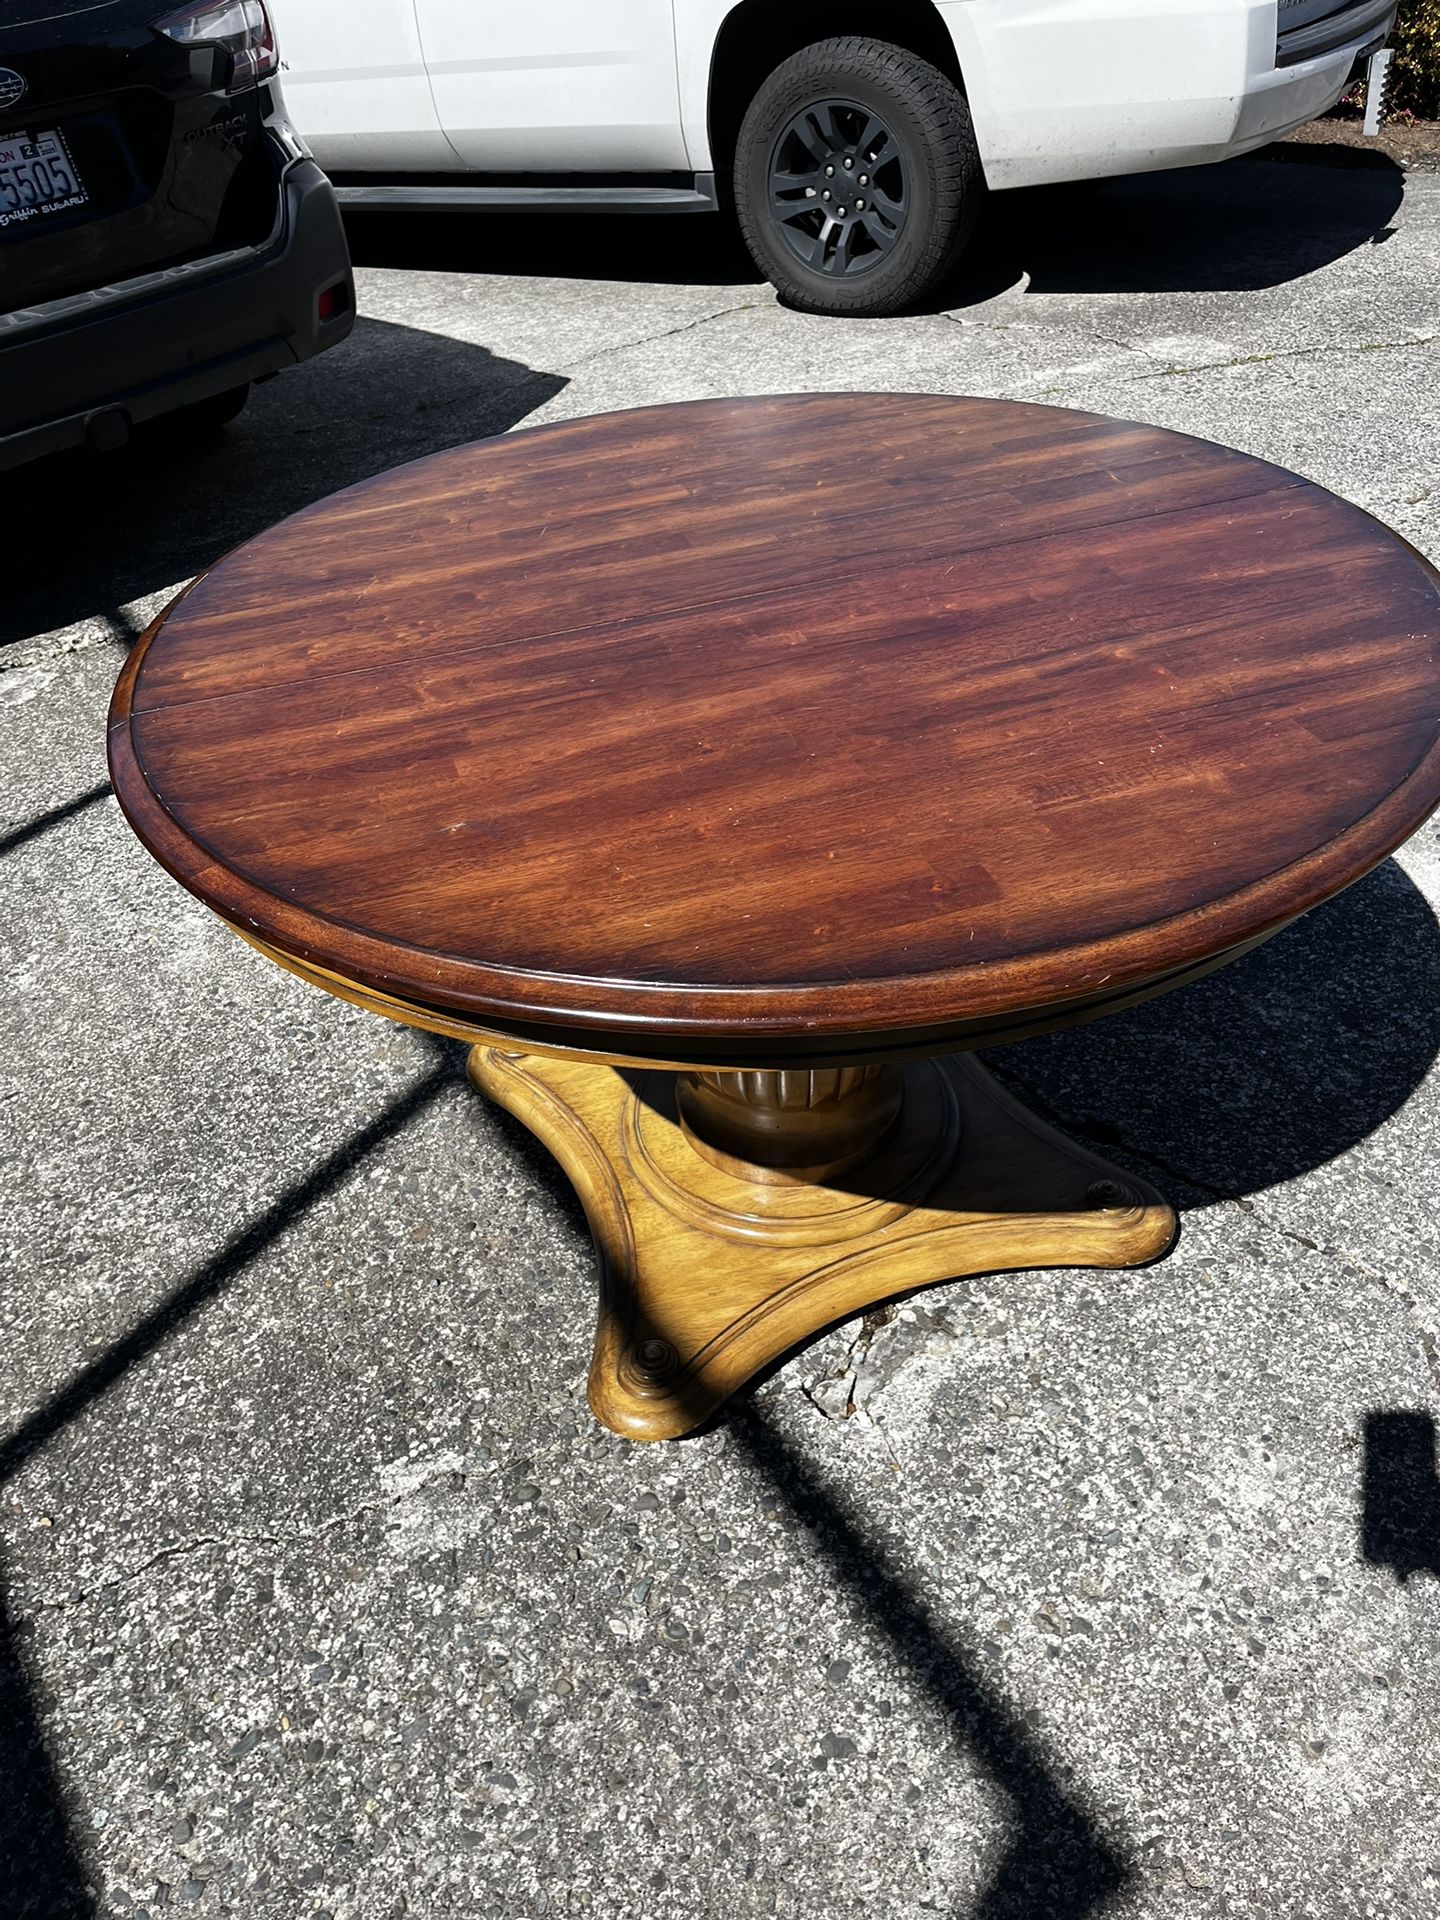 48” Round Table With Built In Leaf